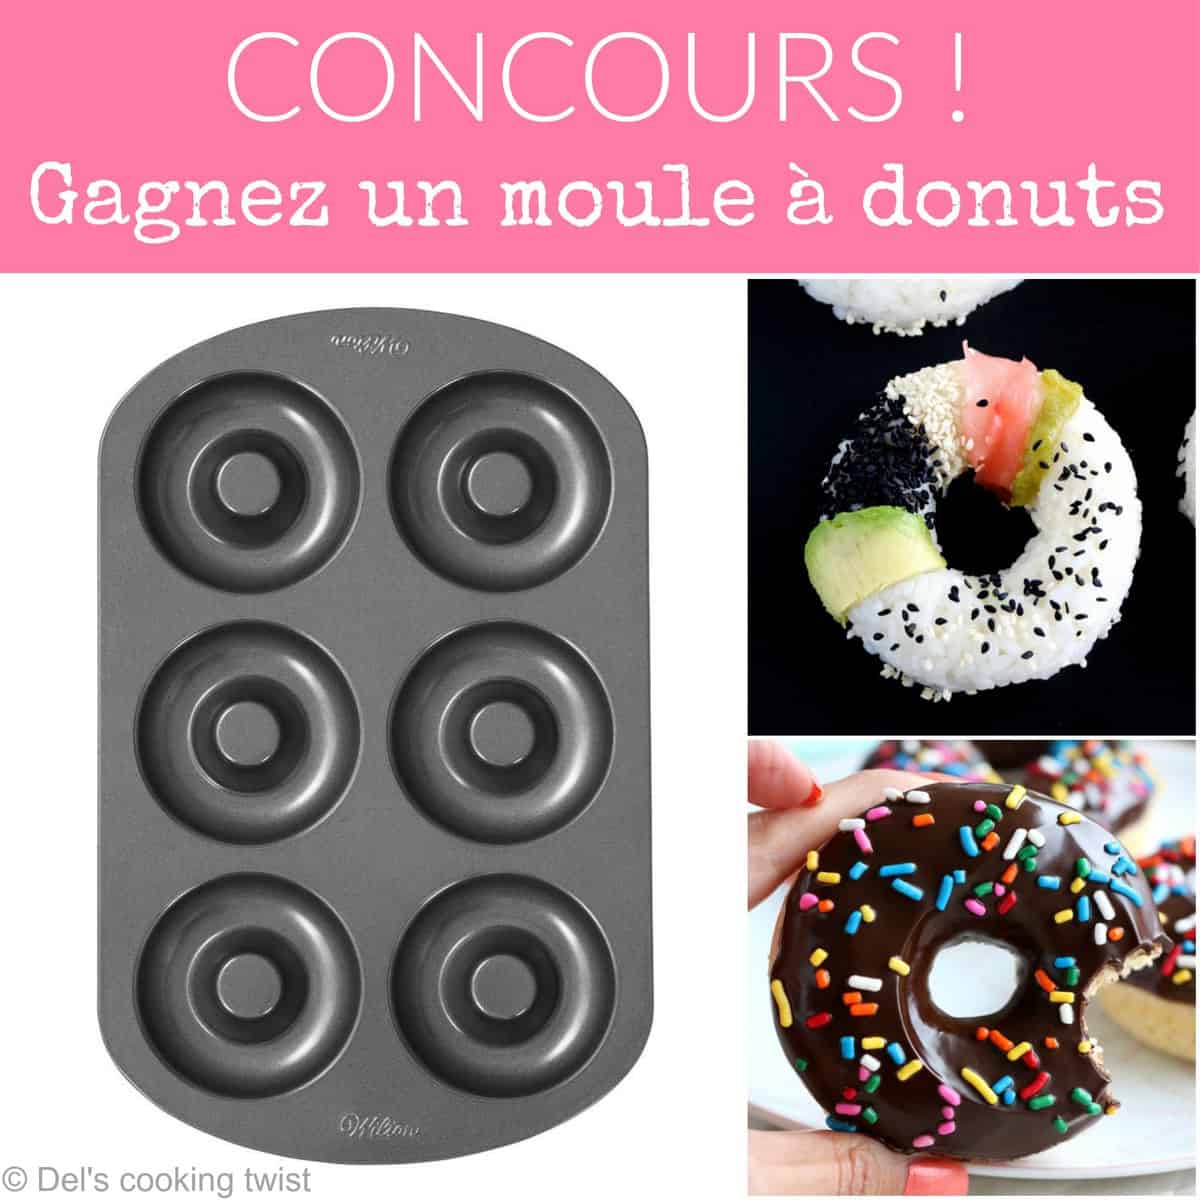 Concours moule donuts